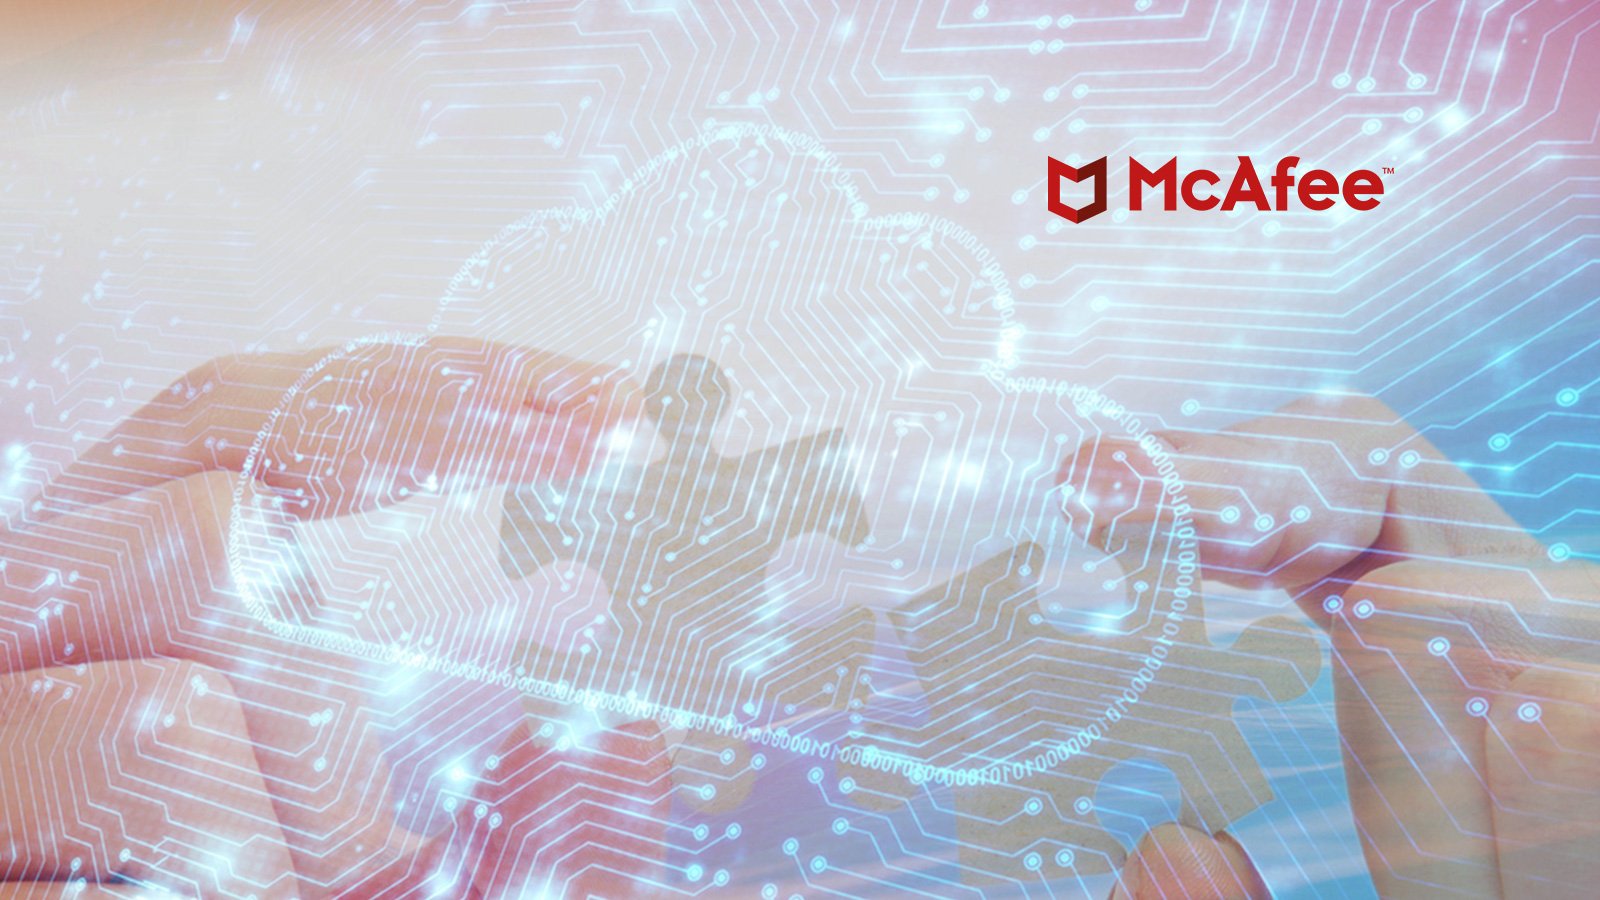 McAfee-Unveils-Integration-with-Microsoft-Teams-to-Secure-and-Manage-Collaboration-in-the-Cloud.jpg